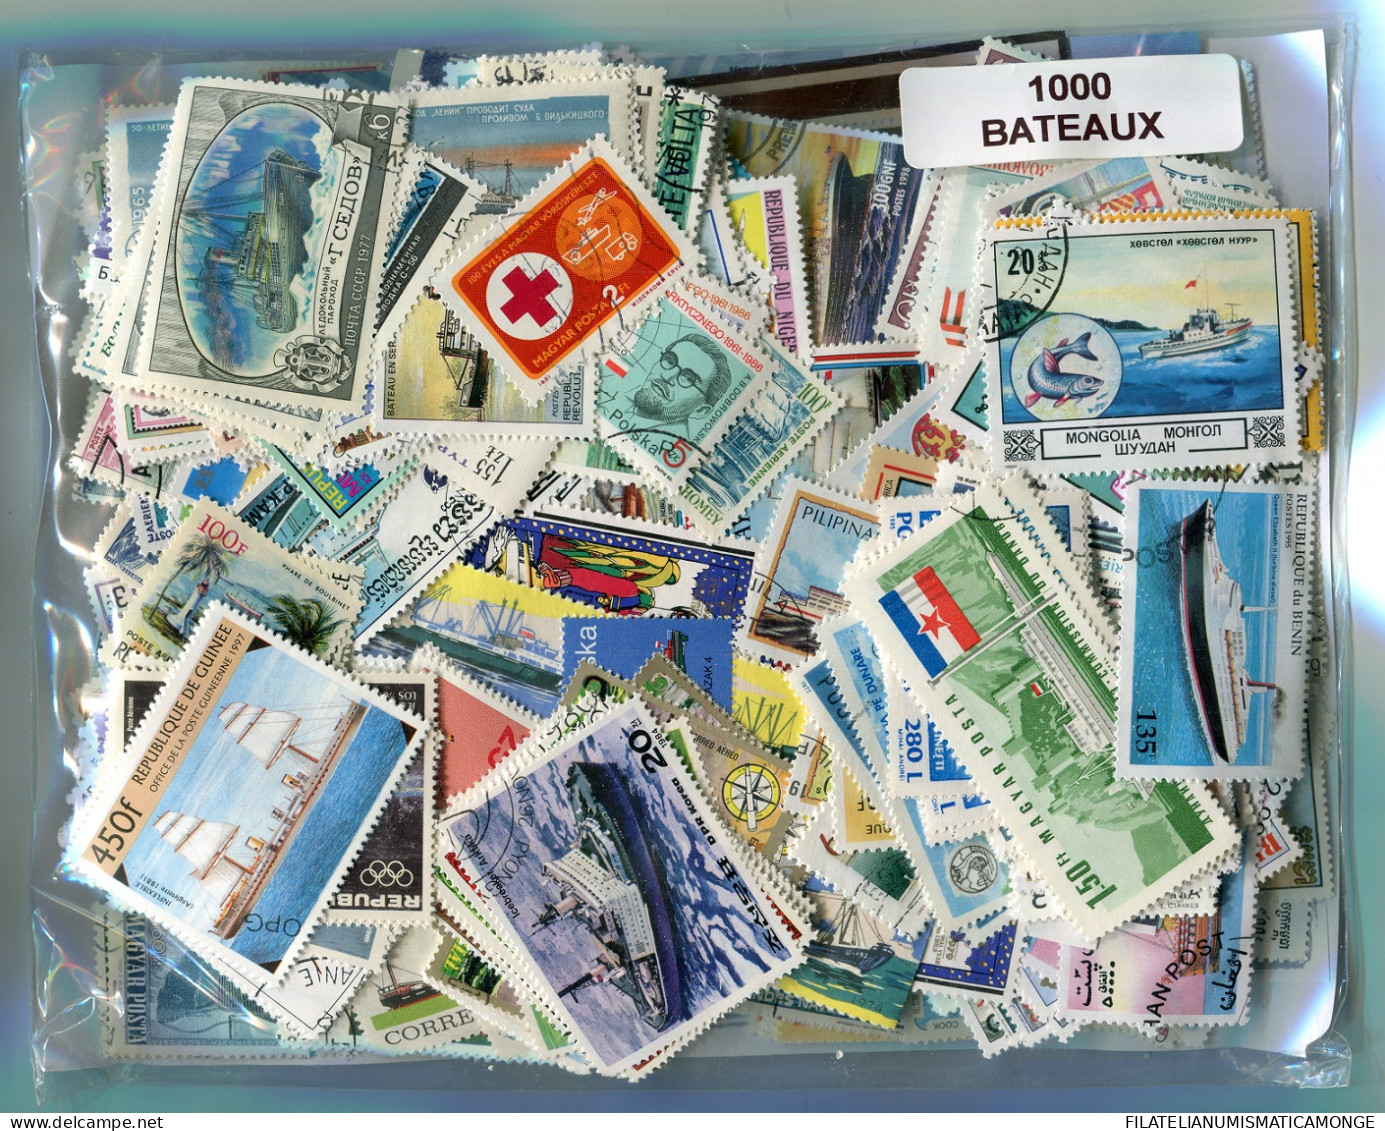  Offer - Lot Stamps - Paqueteria  Temáticas Varias 1000 Sellos Diferentes Barco - Lots & Kiloware (mixtures) - Min. 1000 Stamps